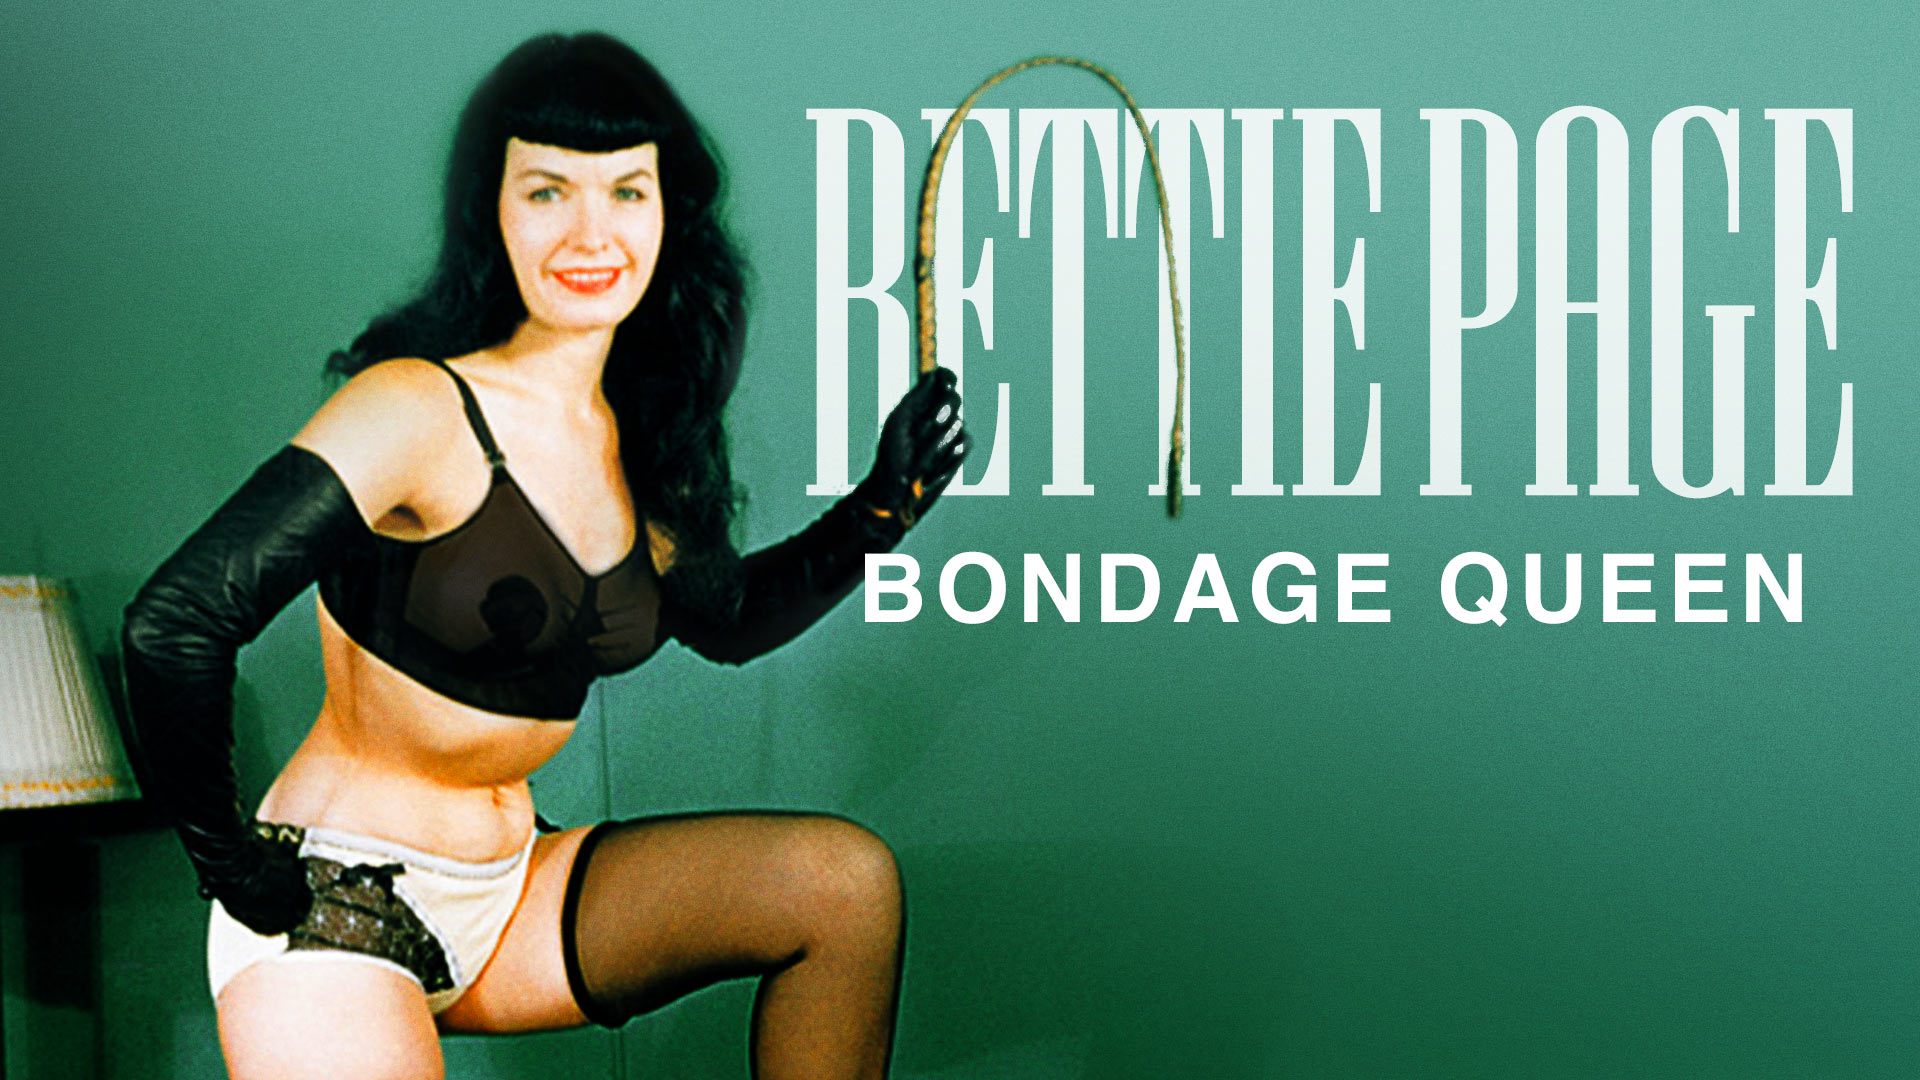 Betty page bondage queen